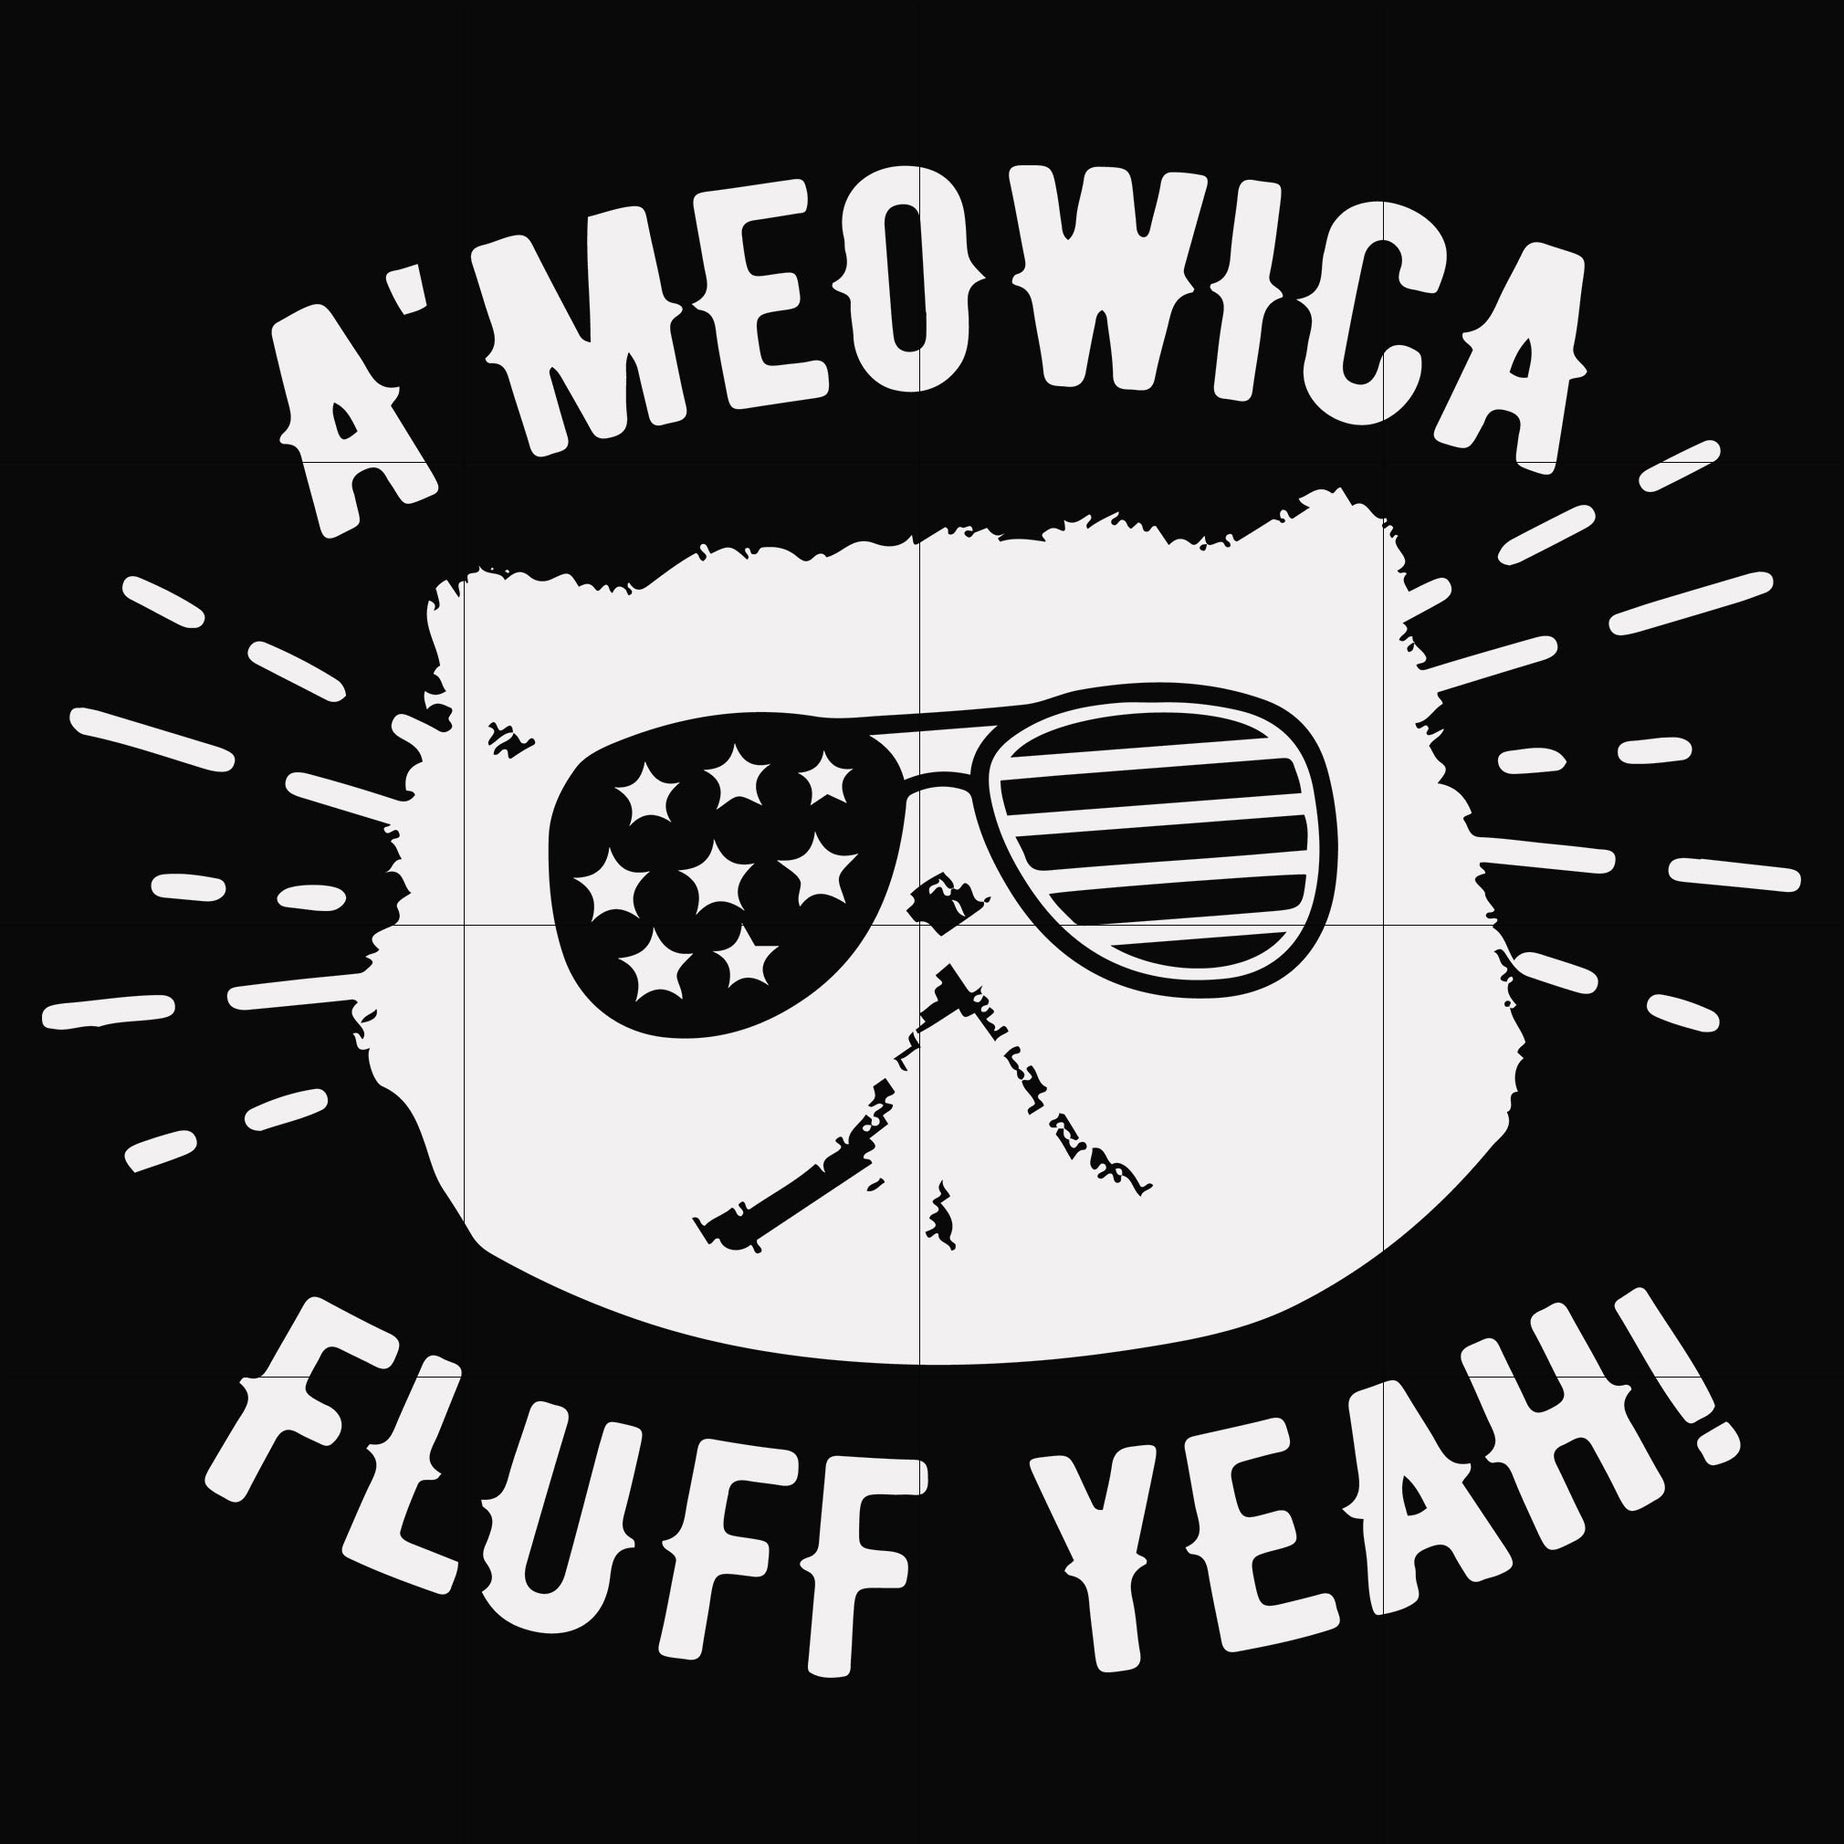 A'meowica fluff yeah svg, png, dxf, eps file FN000787